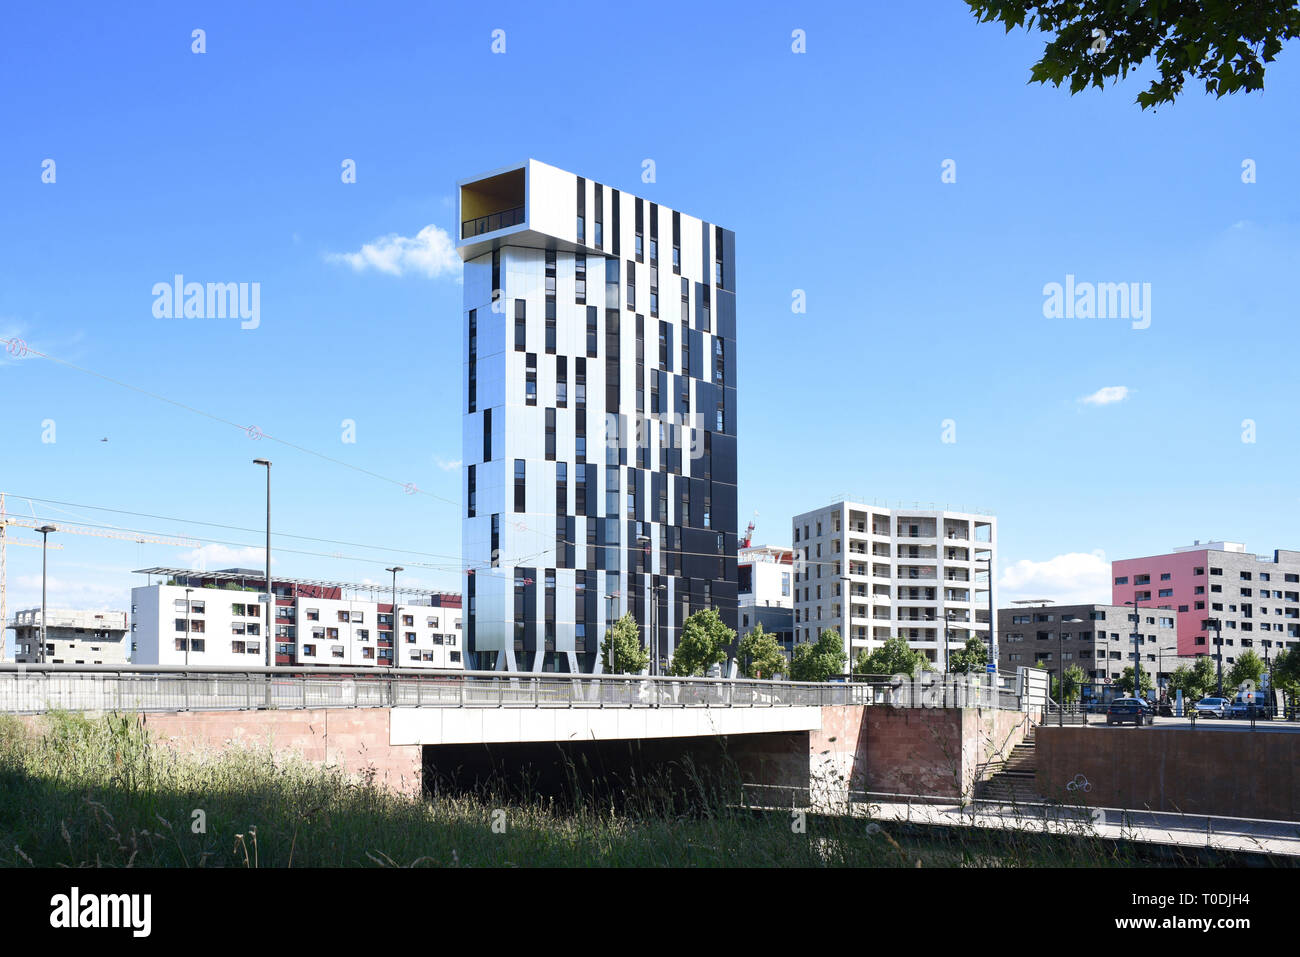 Strasbourg (north-eastern France): building called “Tour Elithis Danube, in the Danube eco-friendly district, the world’s first energy-plus residentia Stock Photo